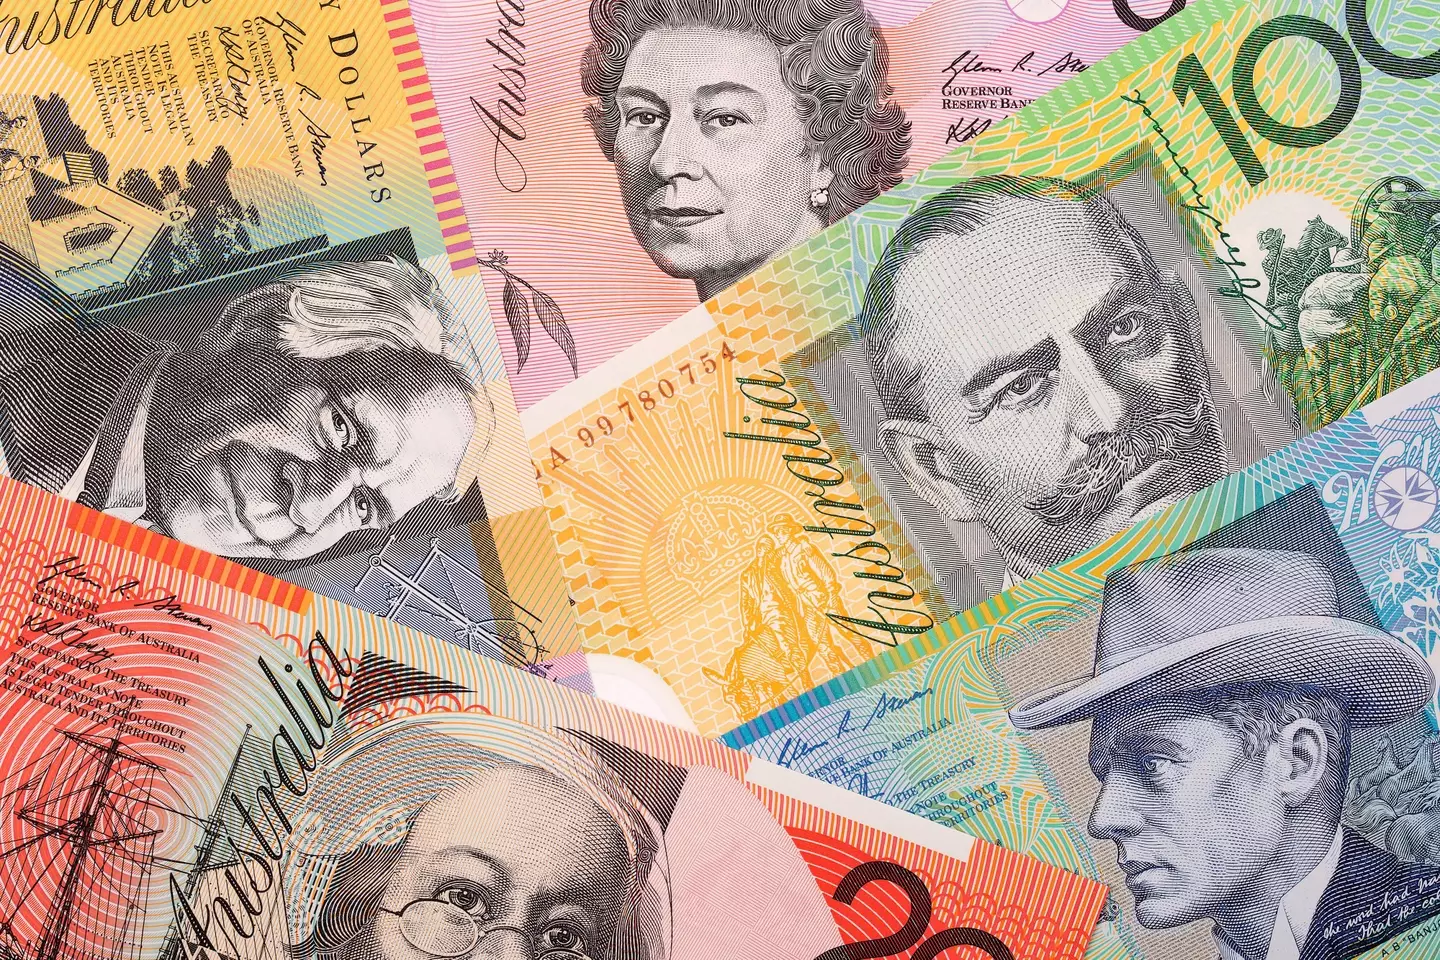 Some Aussies called for a different face to be on the currency.